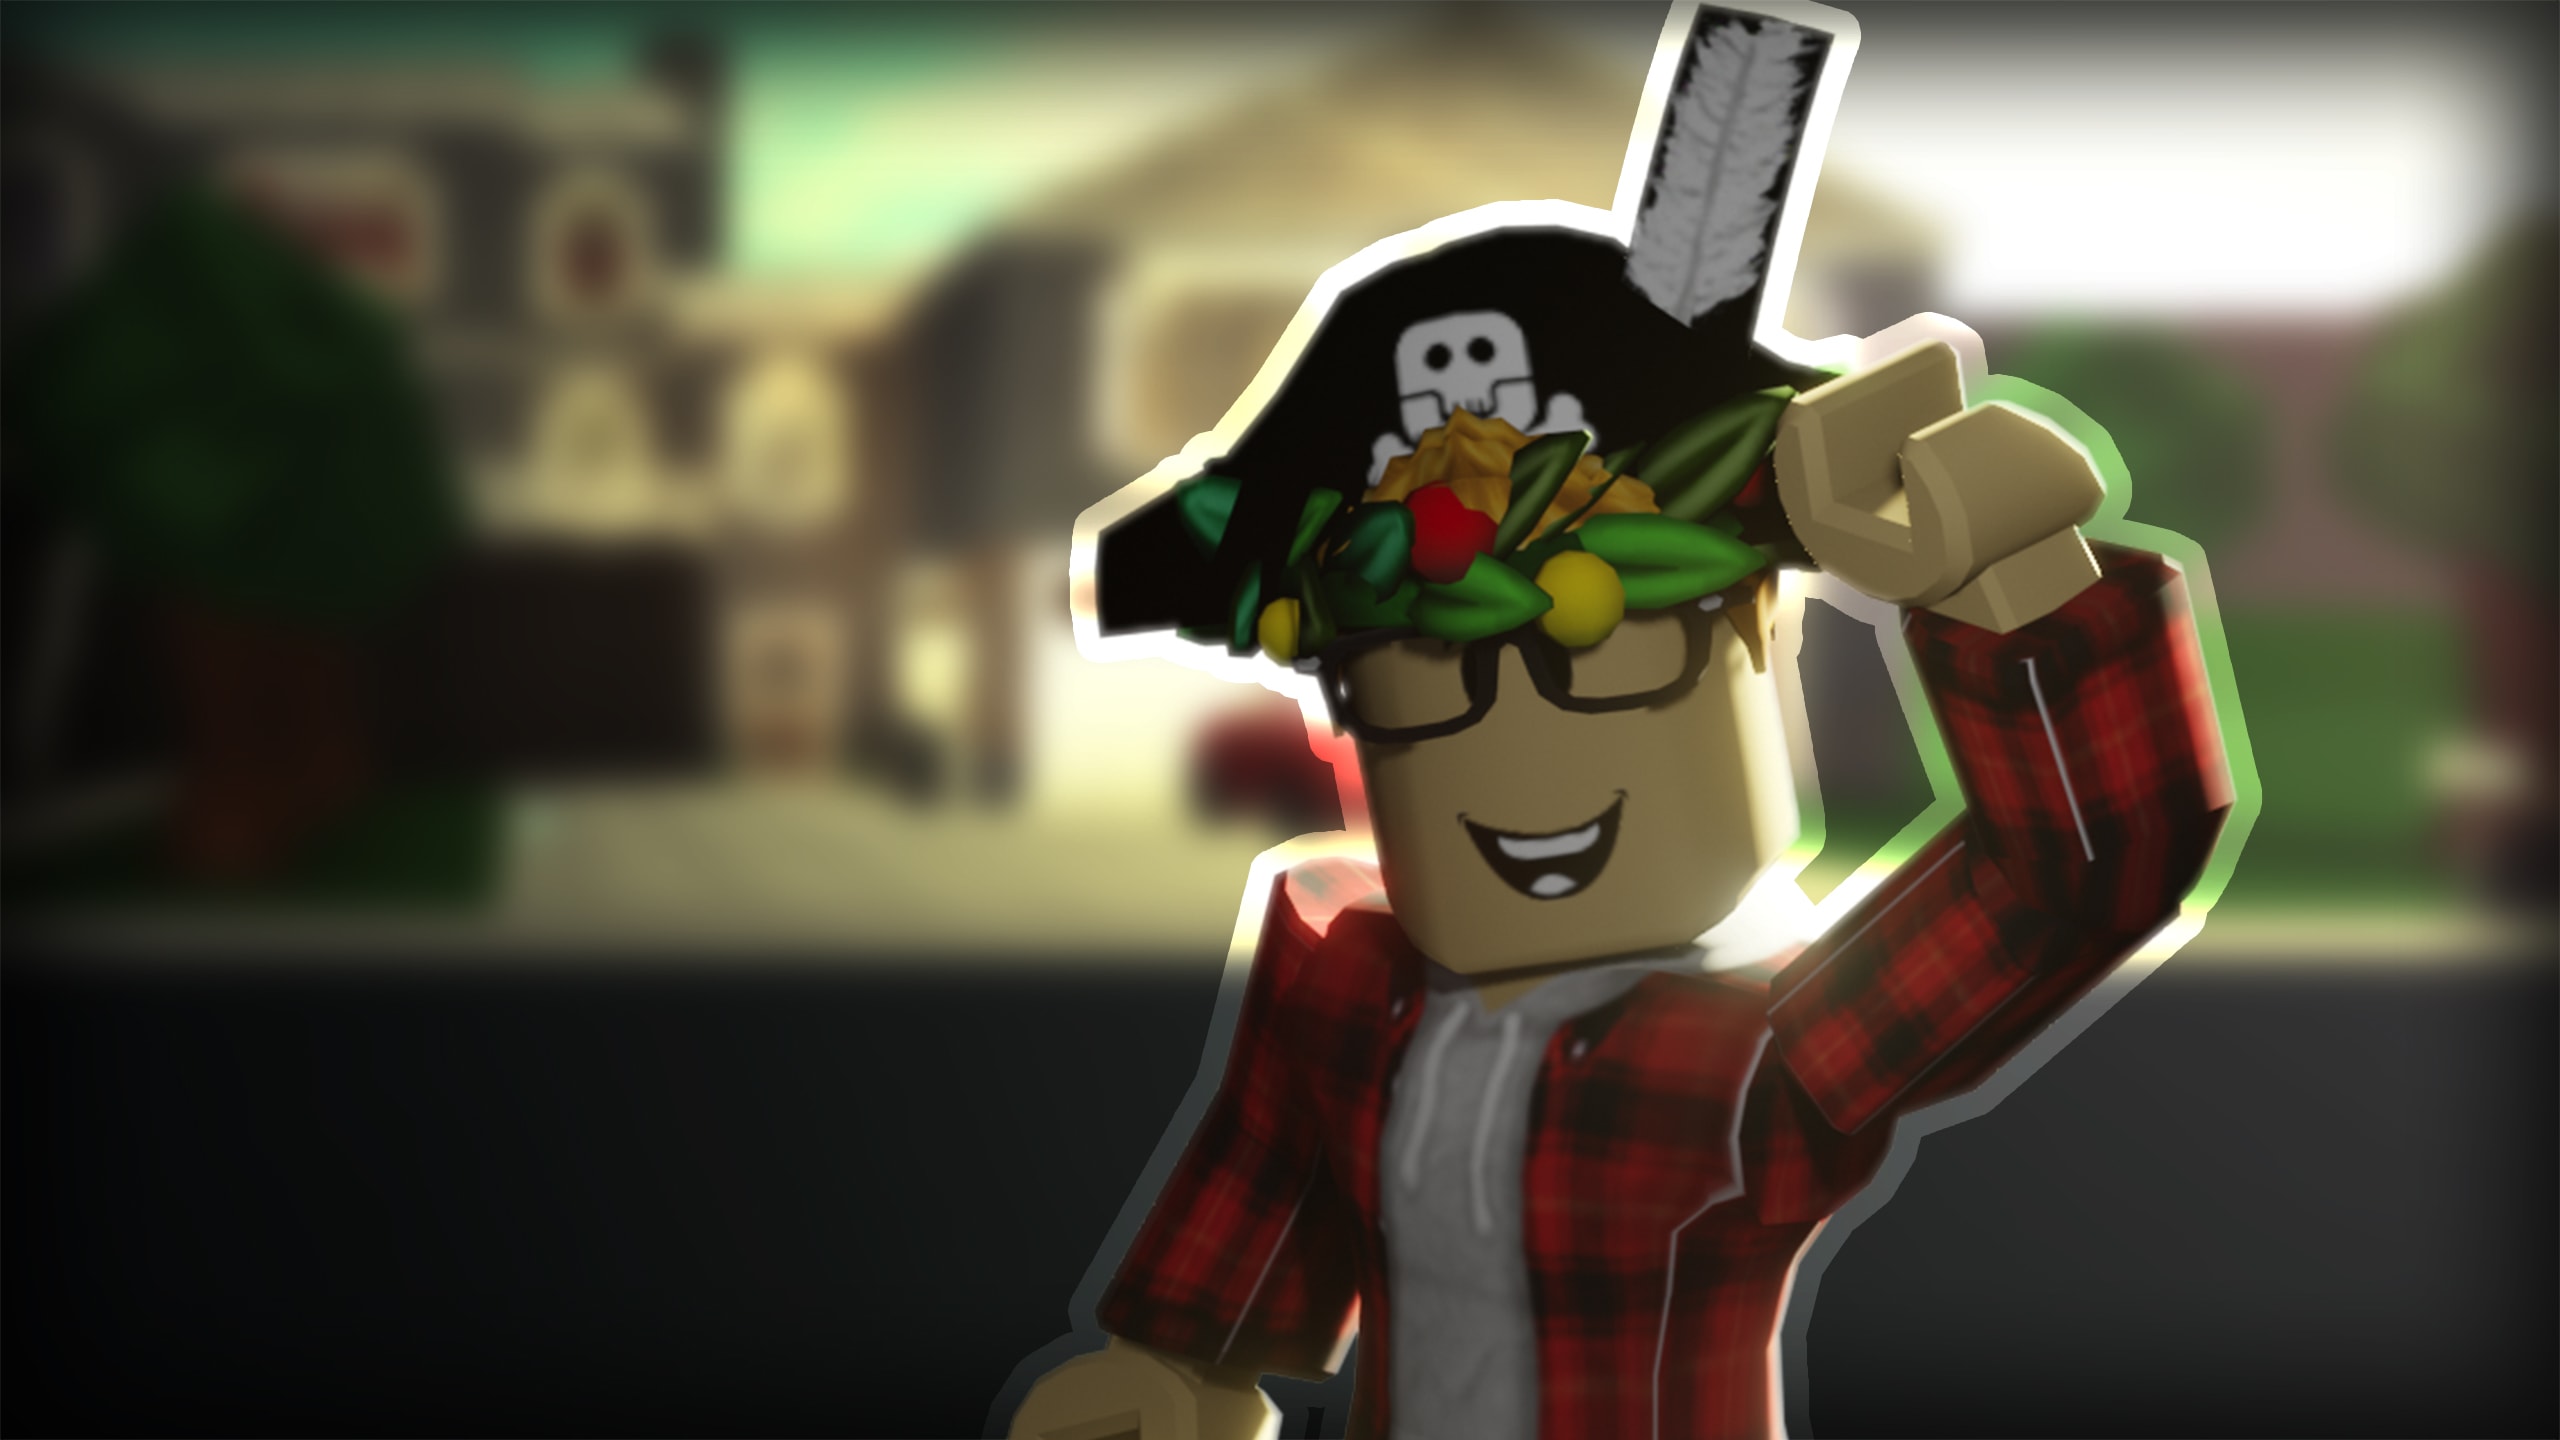 Render And Photoshop Your Roblox Character By Isaiahrowell - roblox character obj file